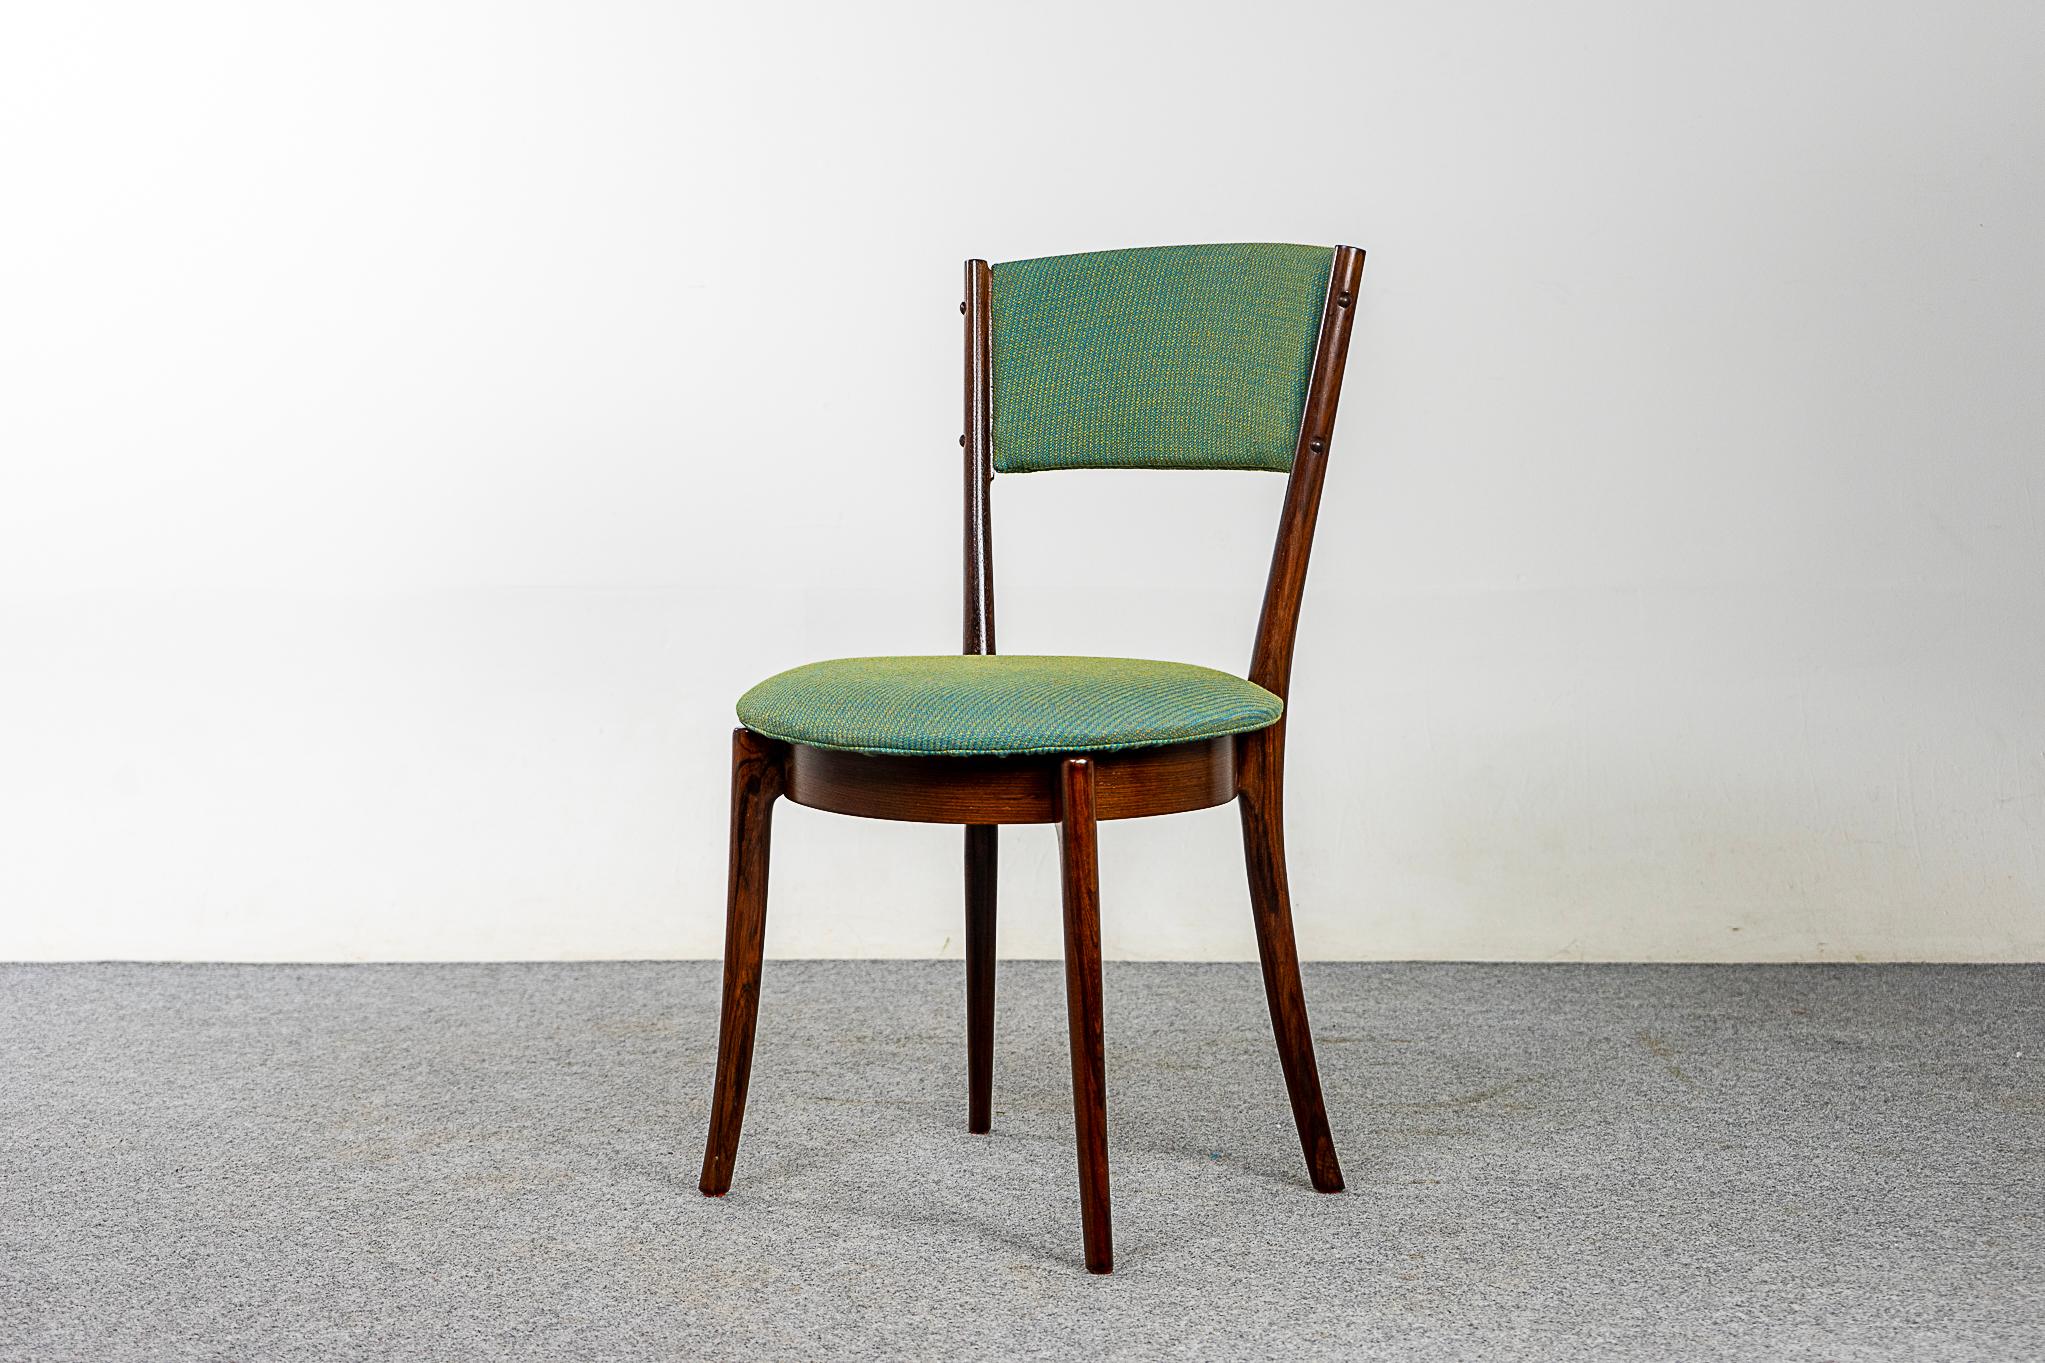 Rosewood Danish mid-century dining chairs, circa 1960's. Beautifully curved tapered backrests and unique circular seat. Gentle, graceful sculptural lines in the splayed legs. Stunning new upholstery with a subtle weave pattern to create balance